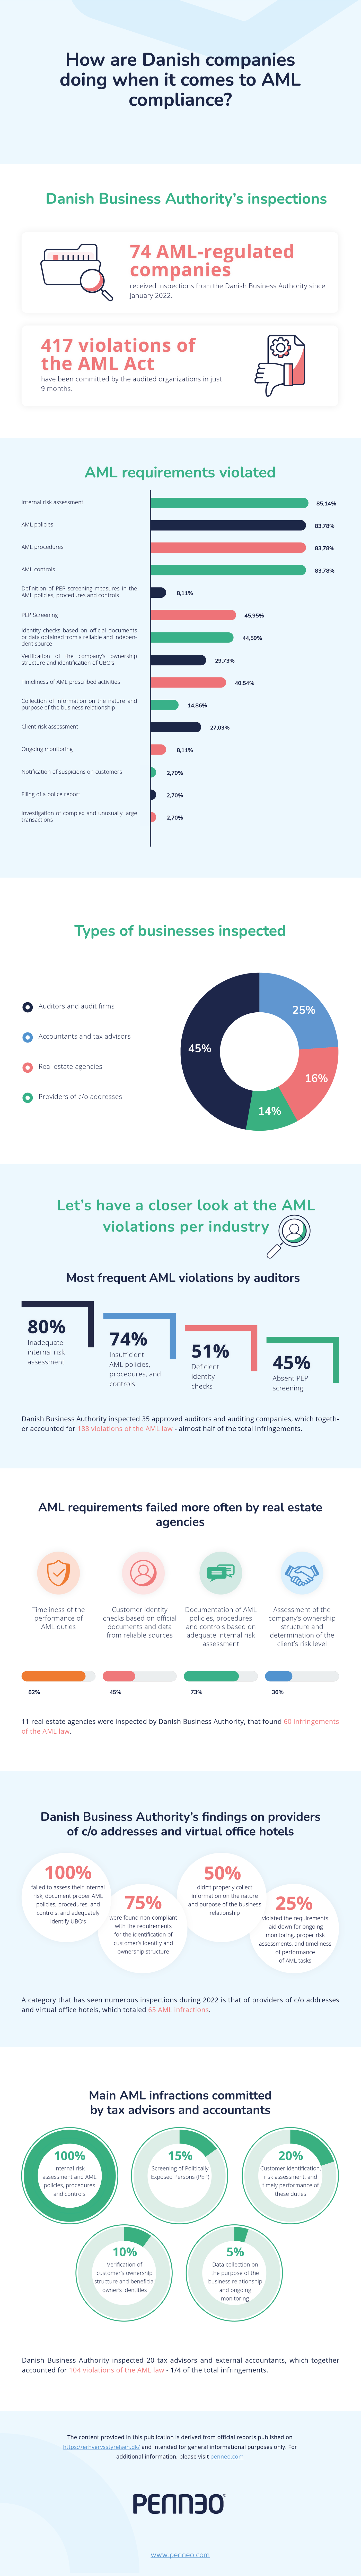 Infographic: How are Danish businesses doing when it comes to AML compliance